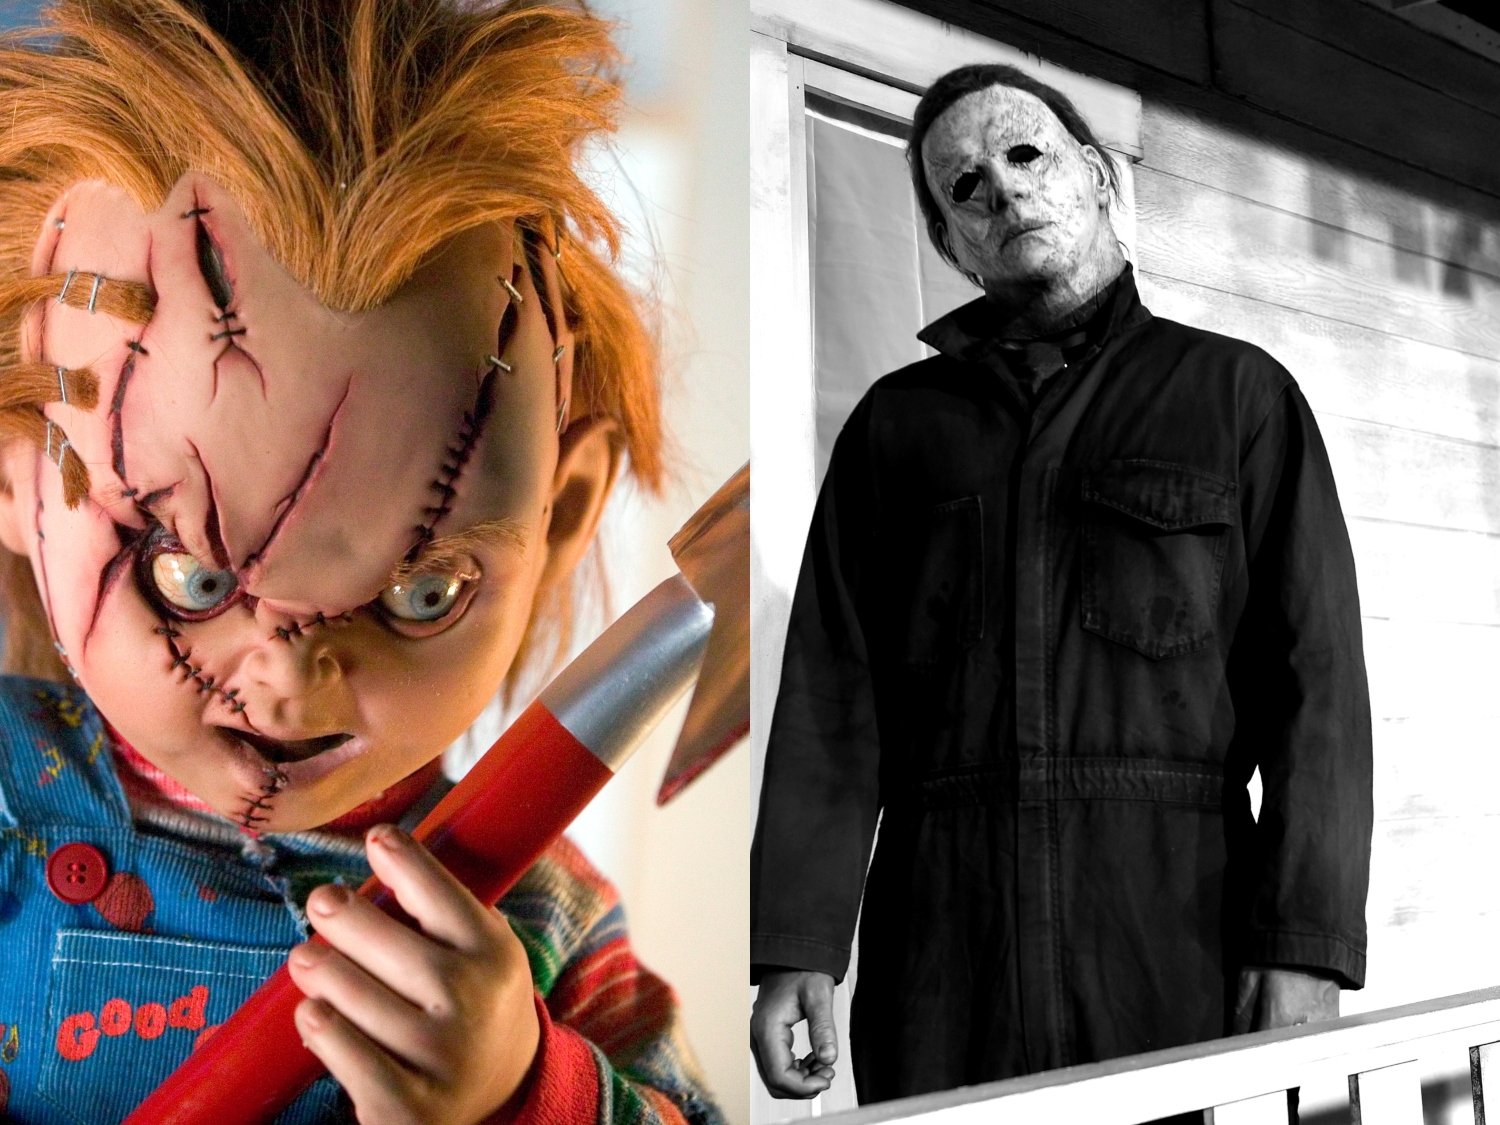 Chucky in 'Seed of Chucky' and Michael Myers at 2018 'Halloween' premiere